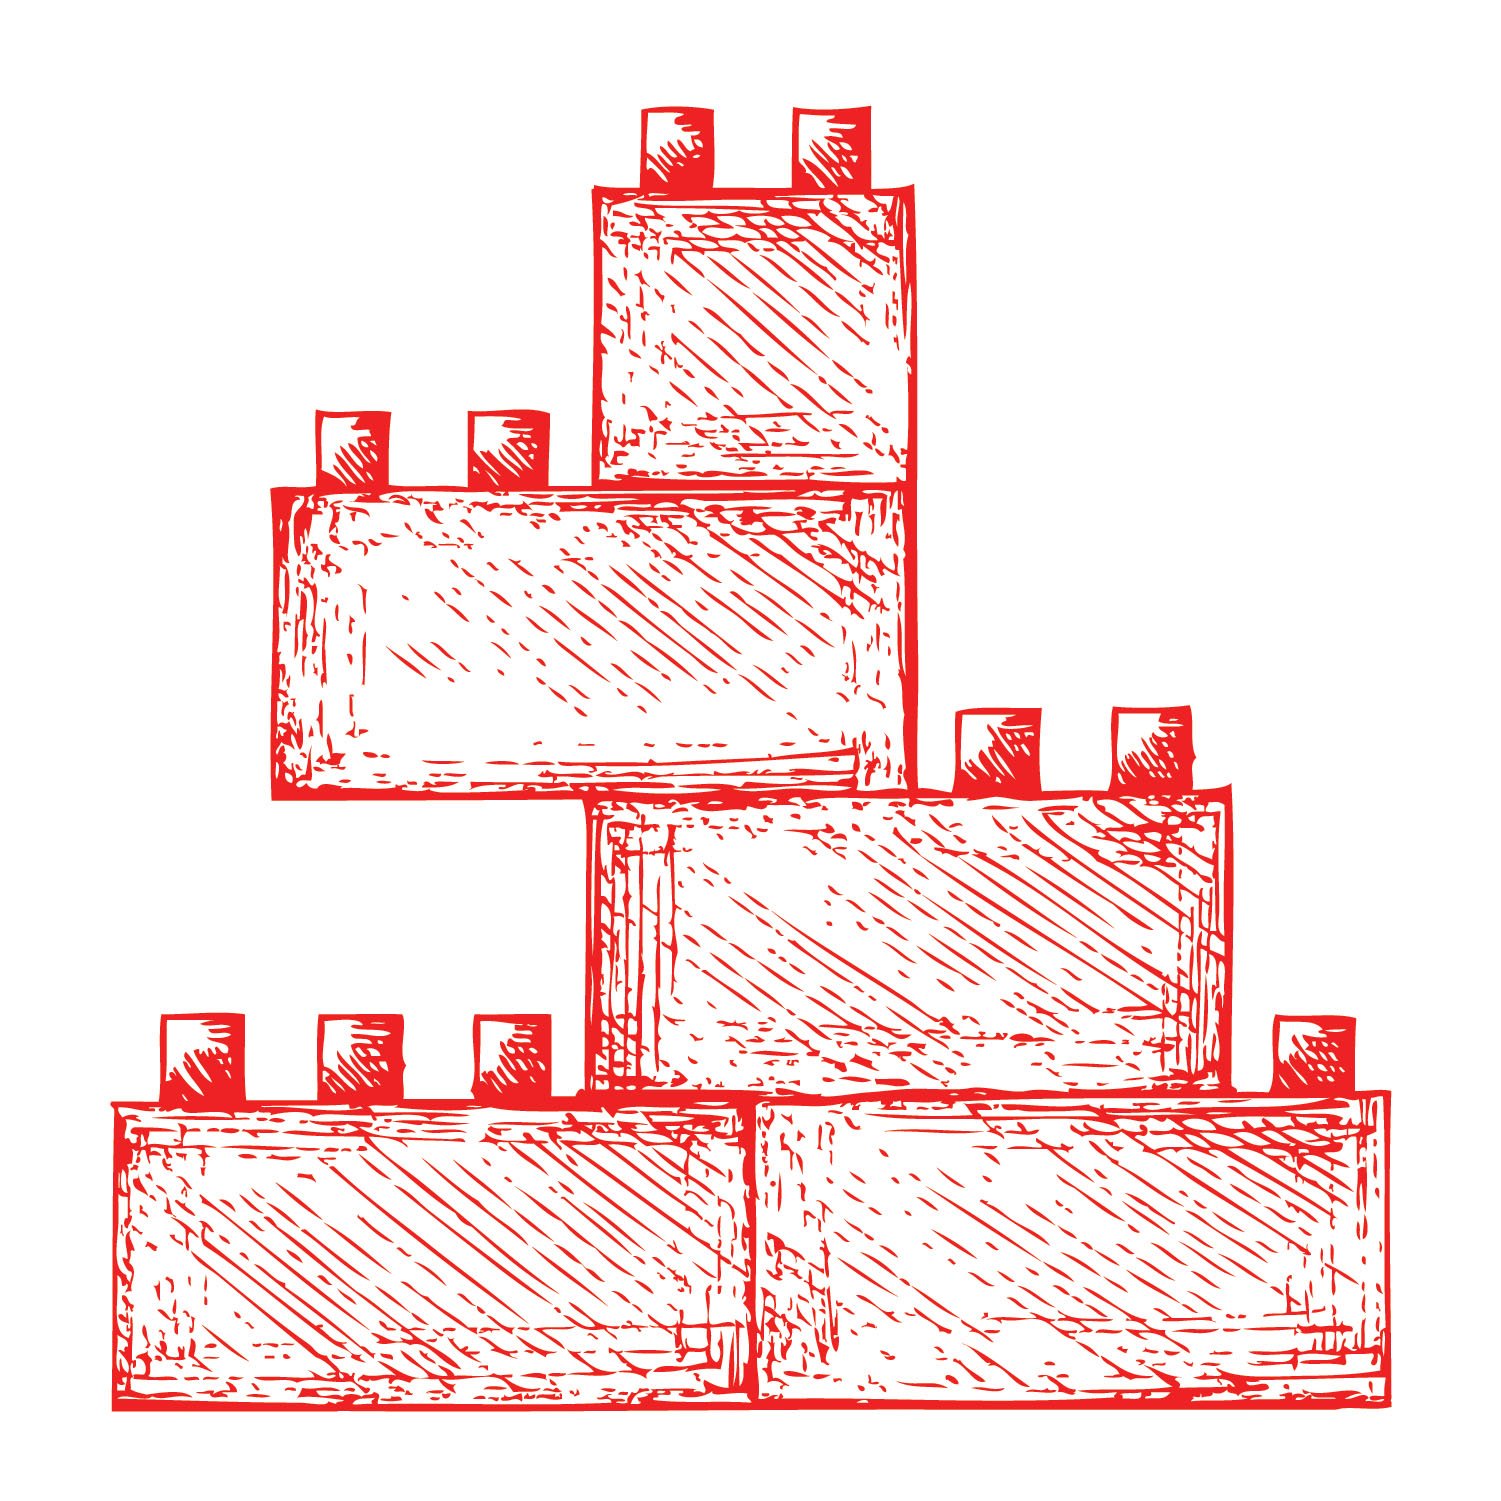 Building blocks stacked on top of each other